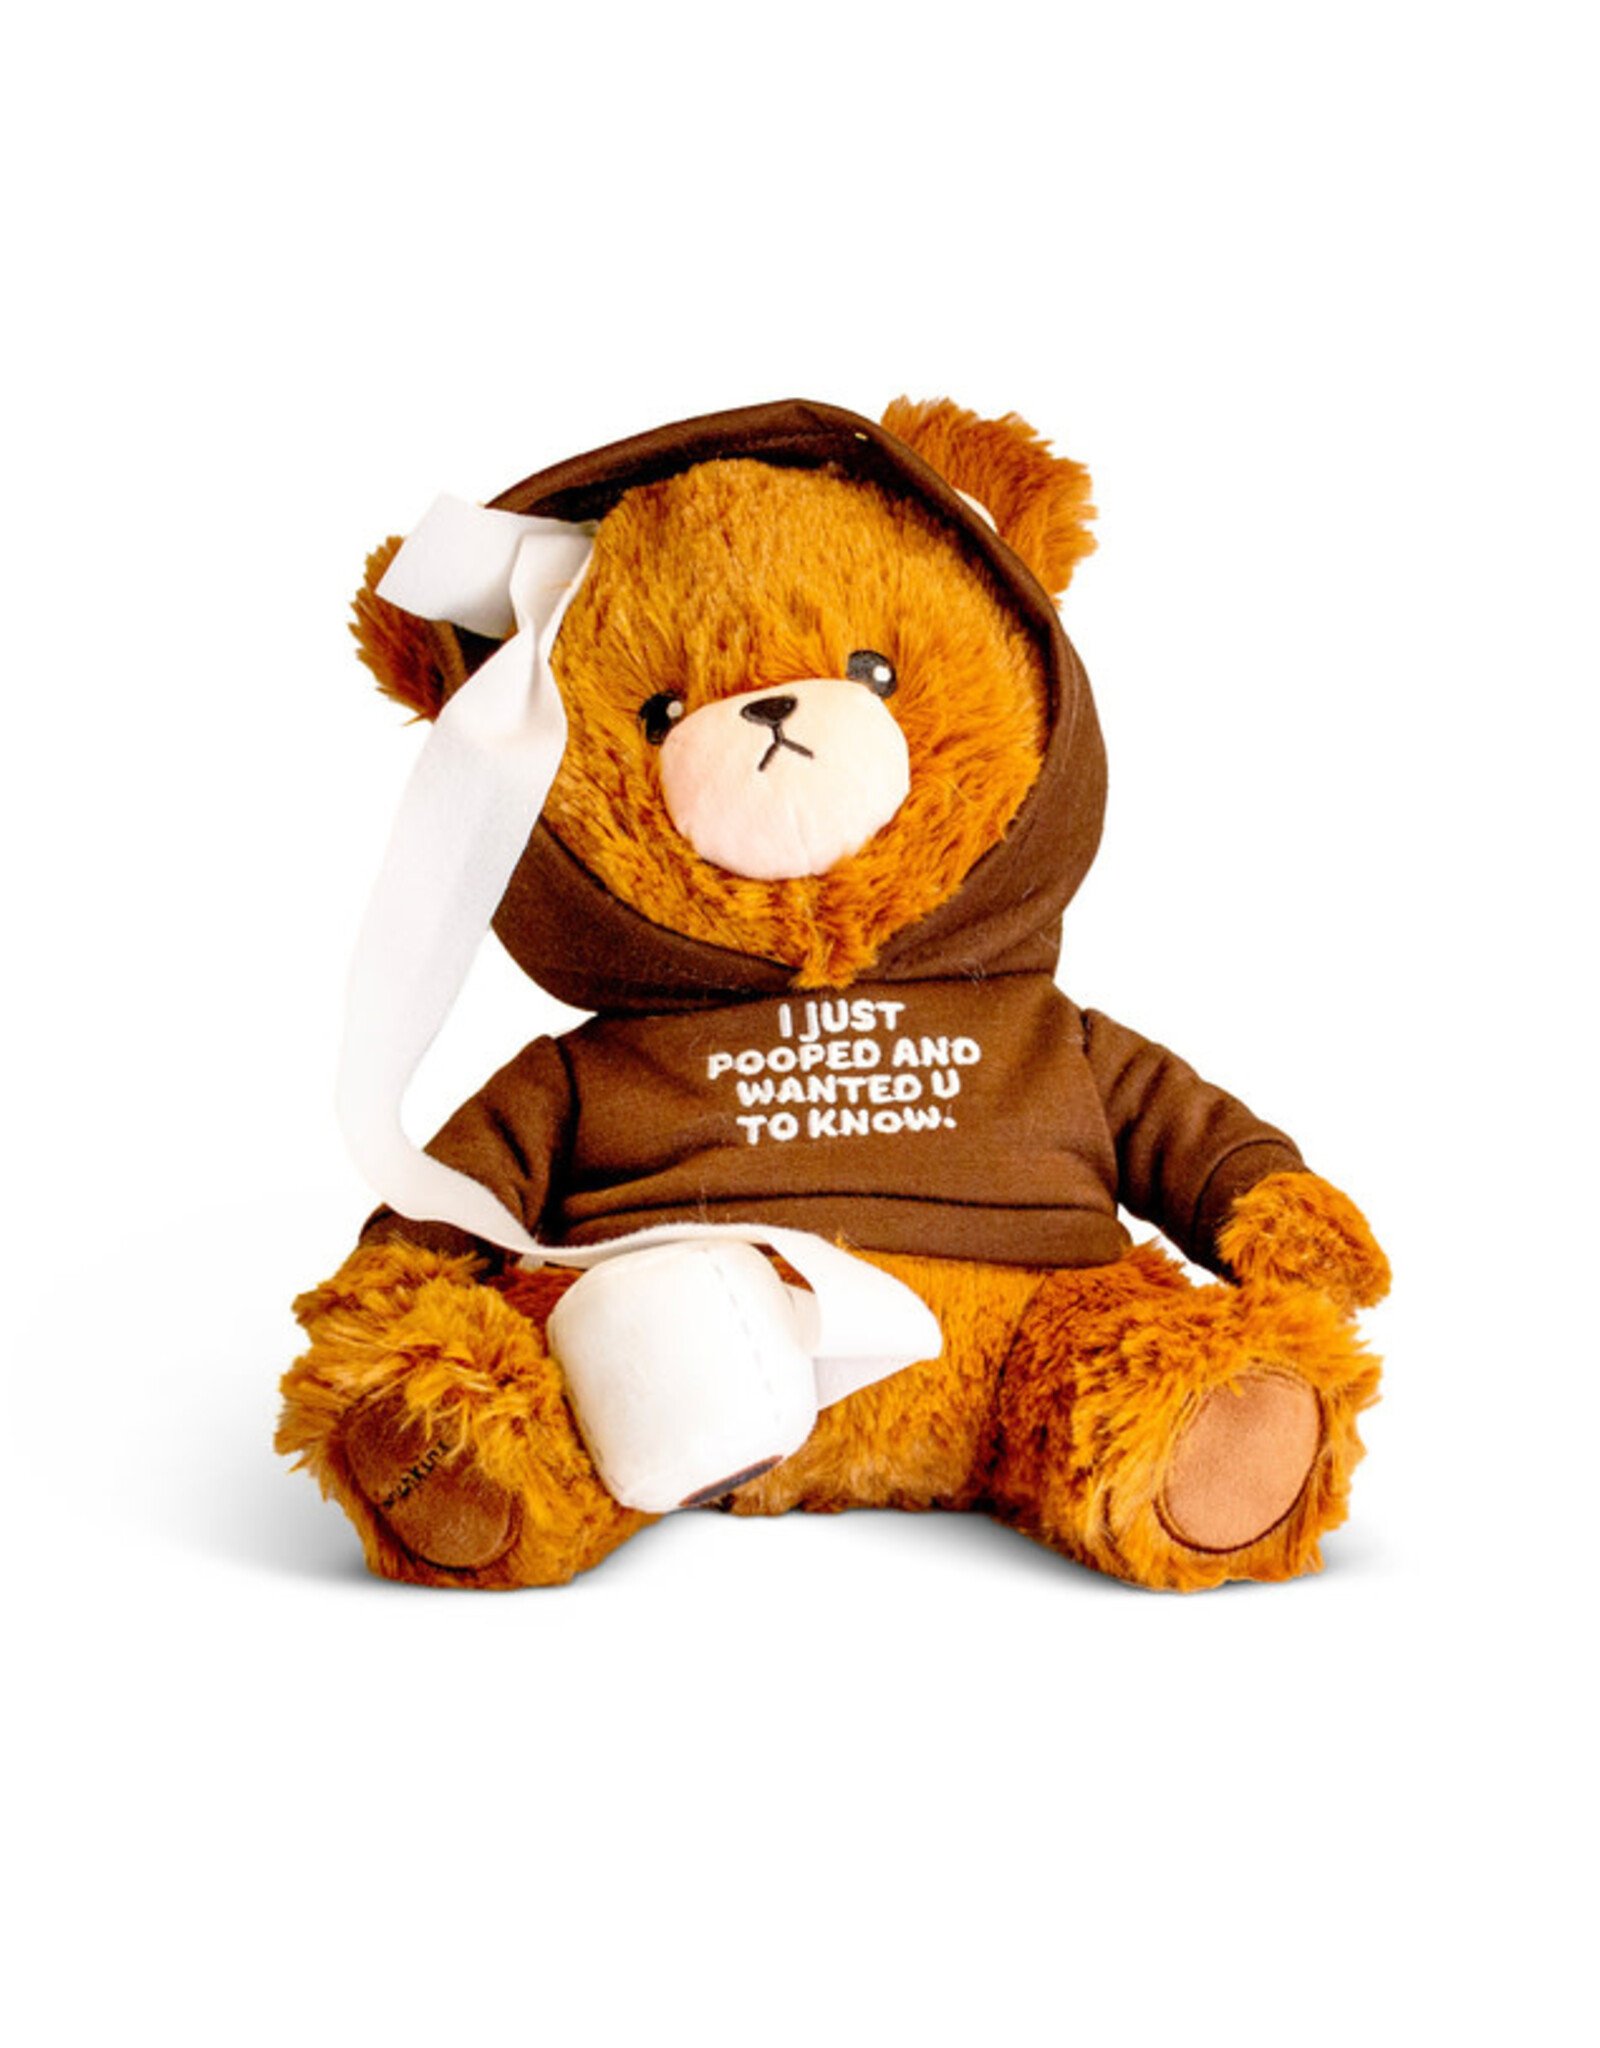 Punchkins Punchkins Teddy Bear - I Just Pooped and Want You to Know